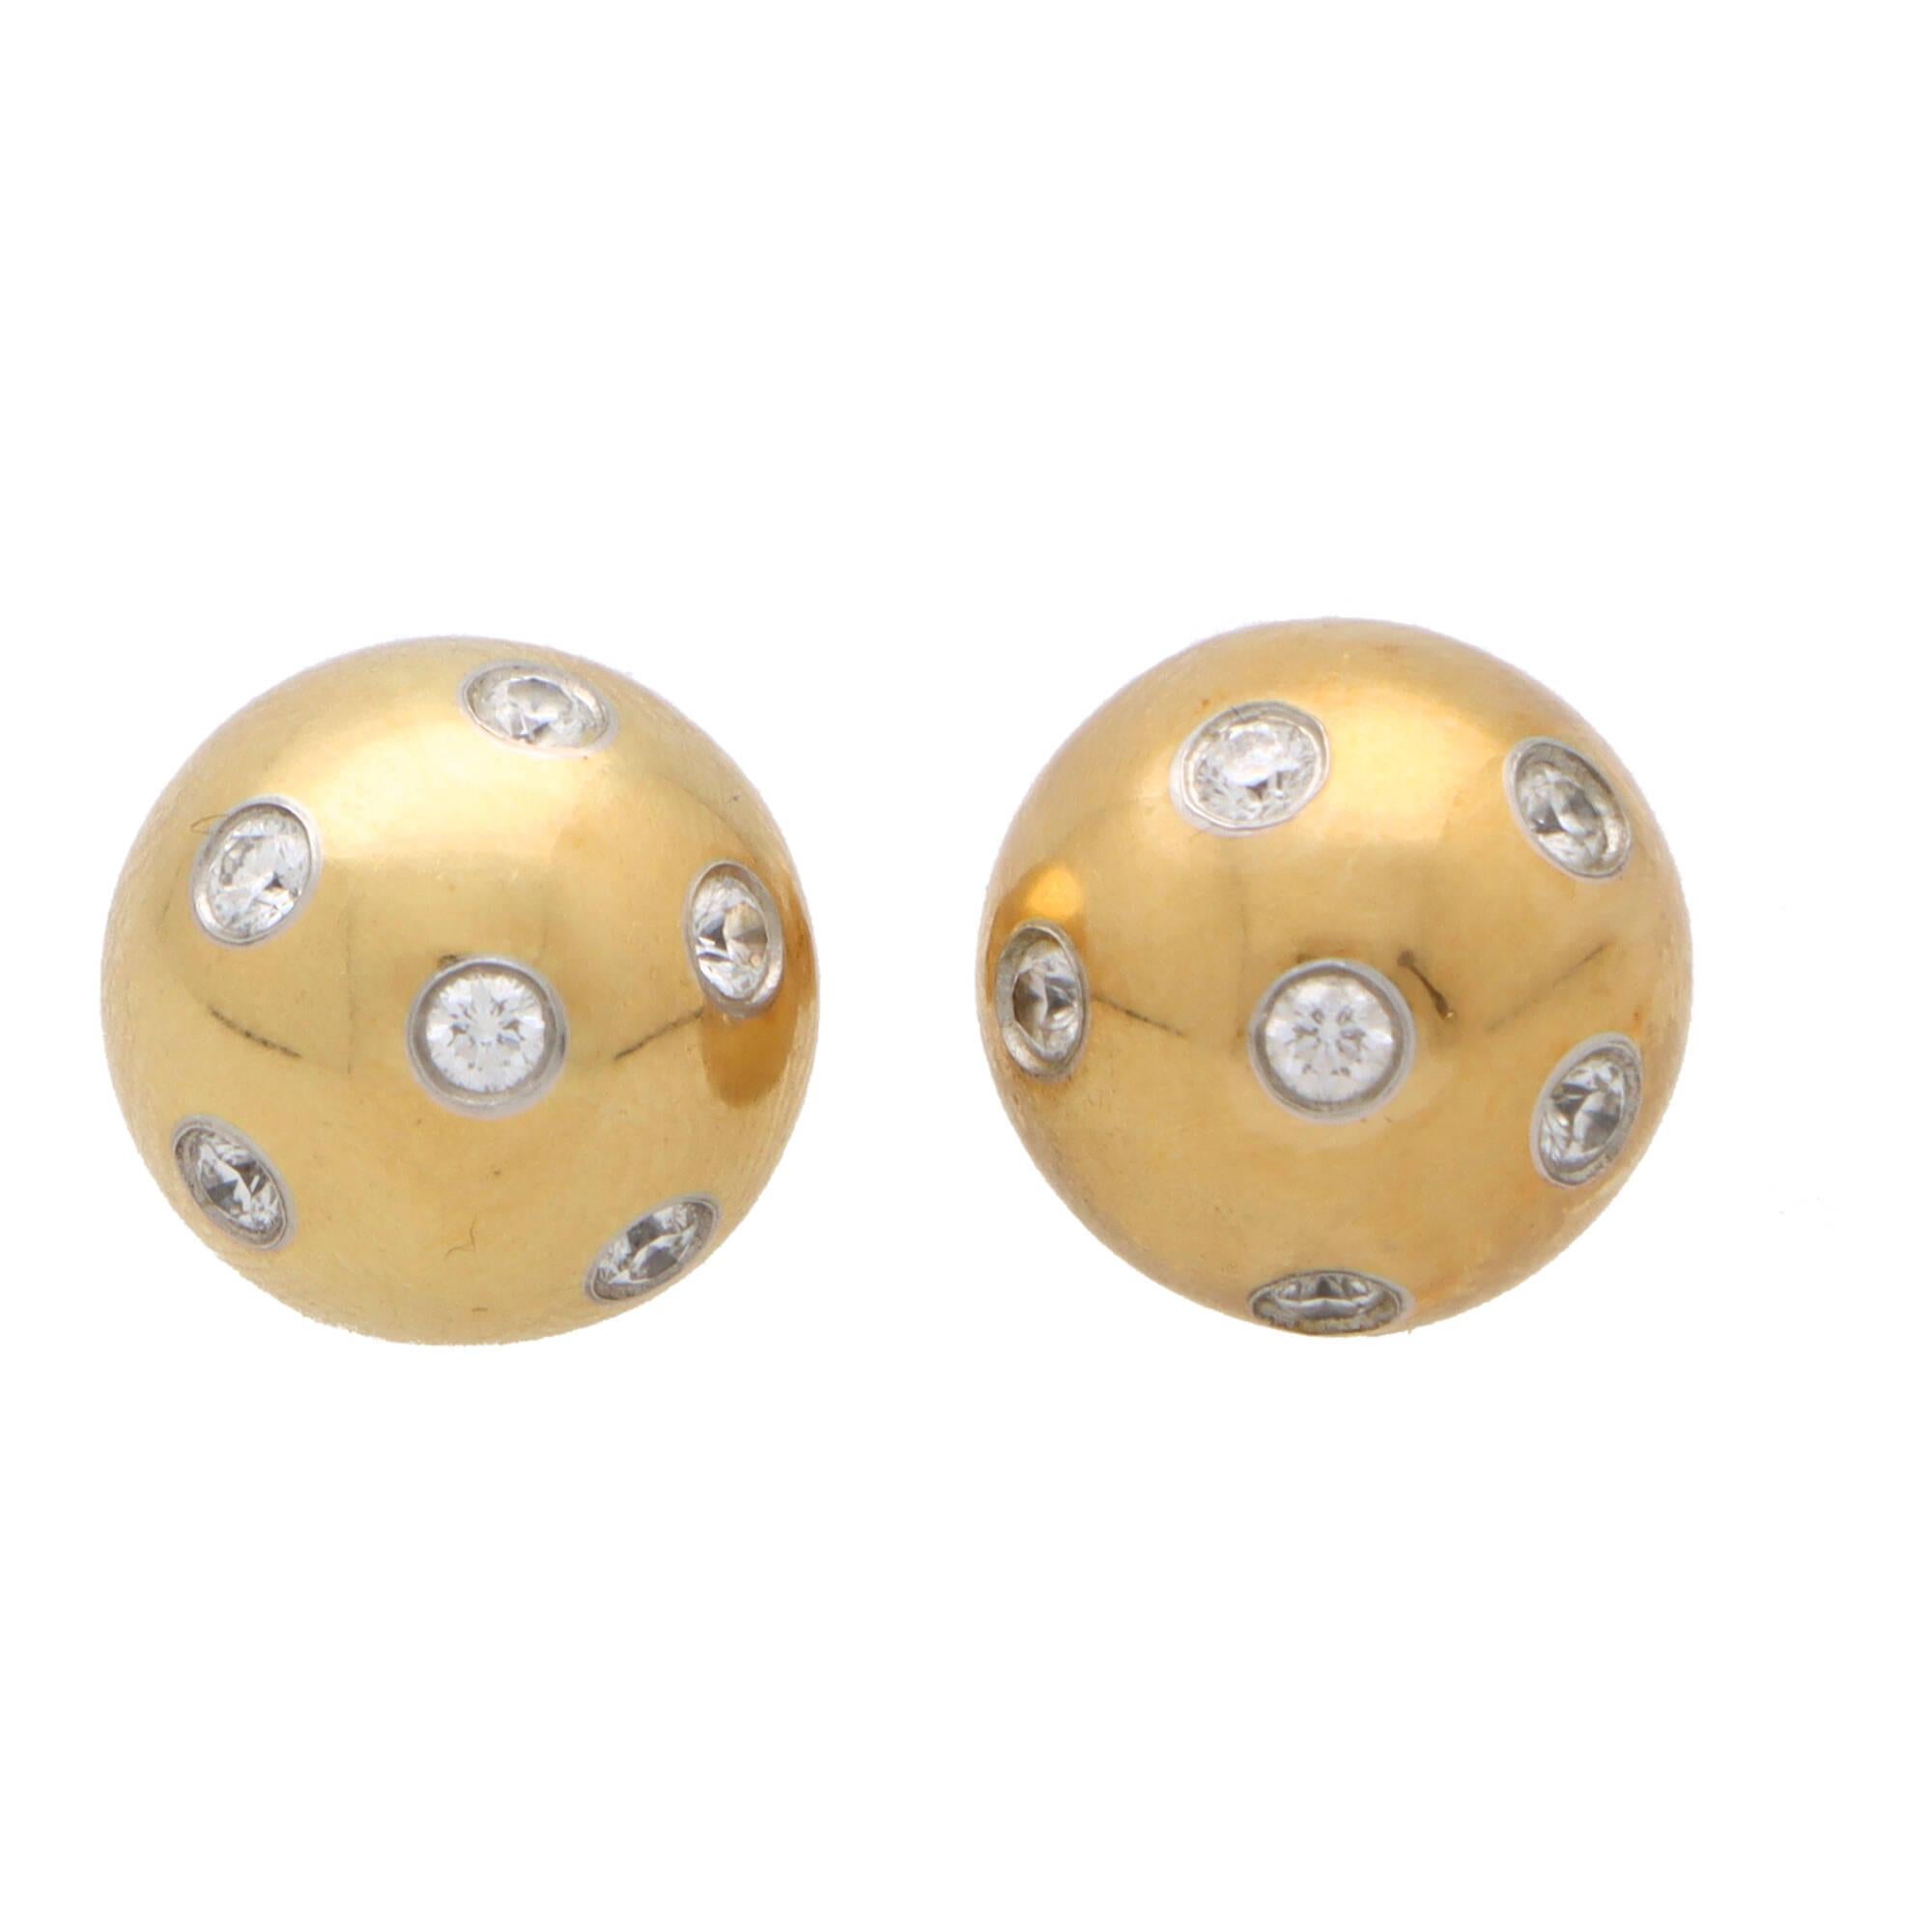 A beautiful vintage pair of Tiffany & Co. ‘Etoile’ diamond earrings set in platinum and 18k yellow gold.

From the now discontinued ‘Etoile’ collection, each earring depicts a yellow gold ball, rub over set with six round brilliant cut diamonds.